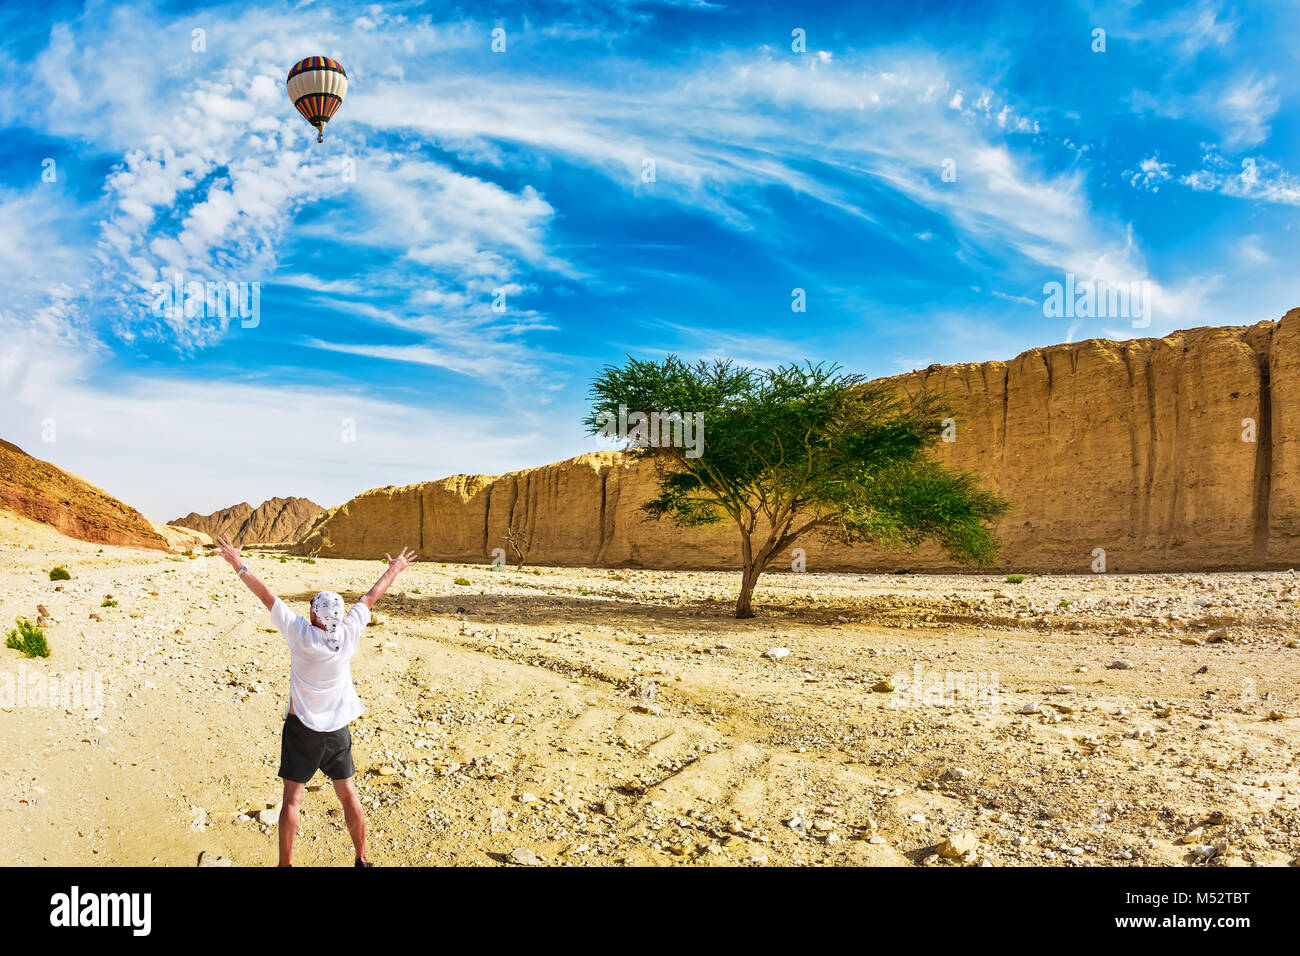 The huge multi-colored balloon flies over the hot desert Stock Photo